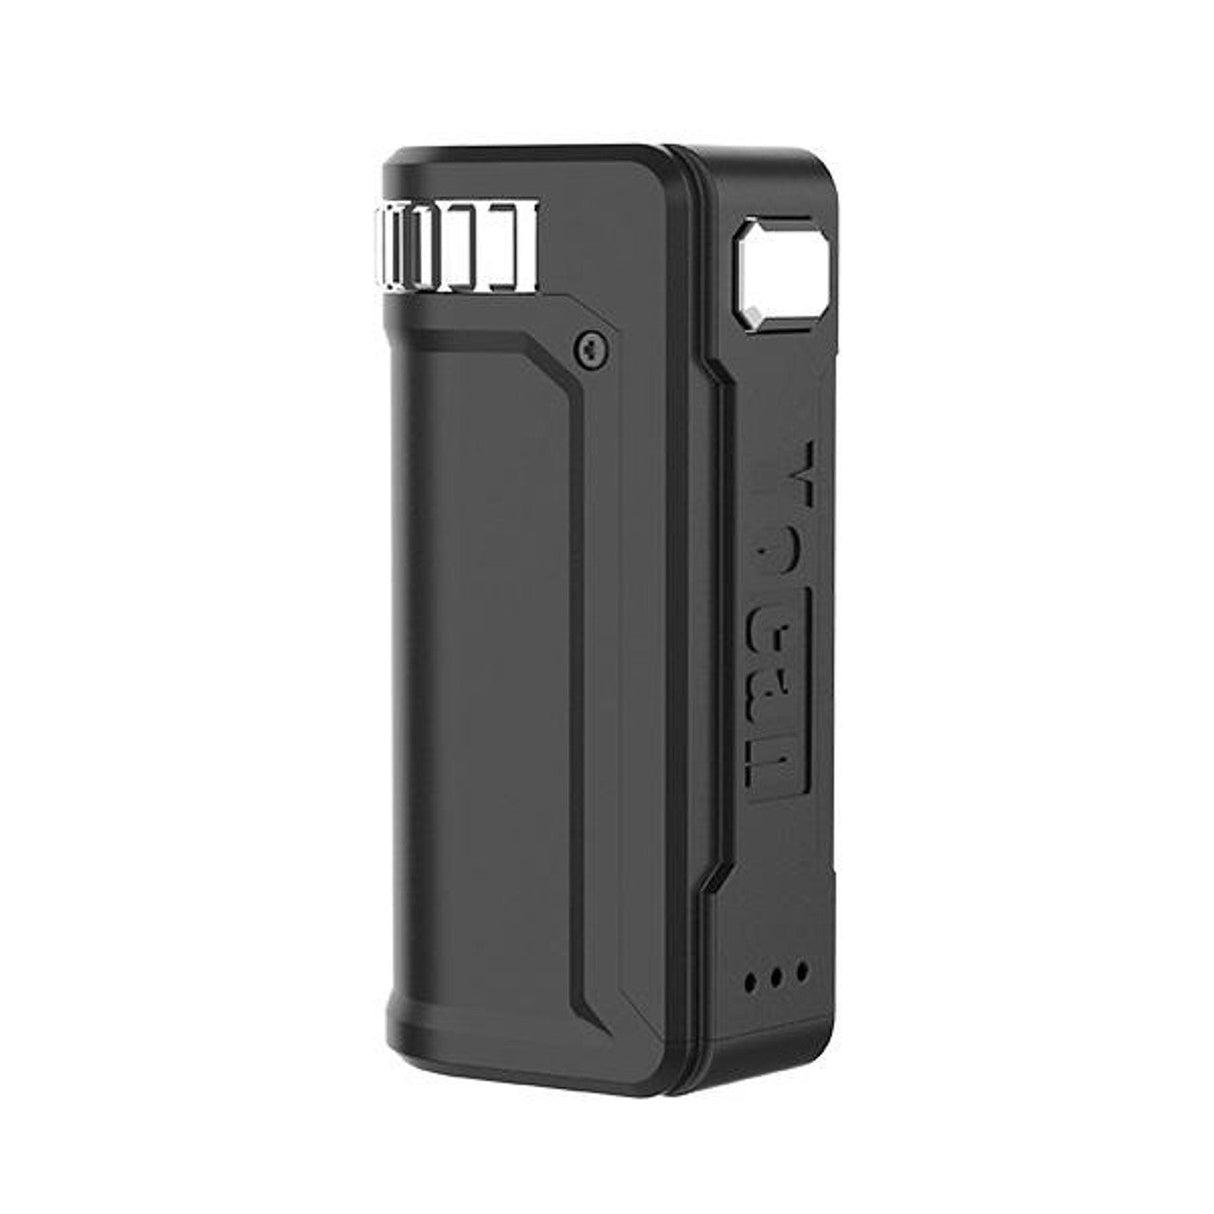 Yocan UNI-S Universal Box Mod in Black, Portable Metal Vaporizer for Concentrates, Side View